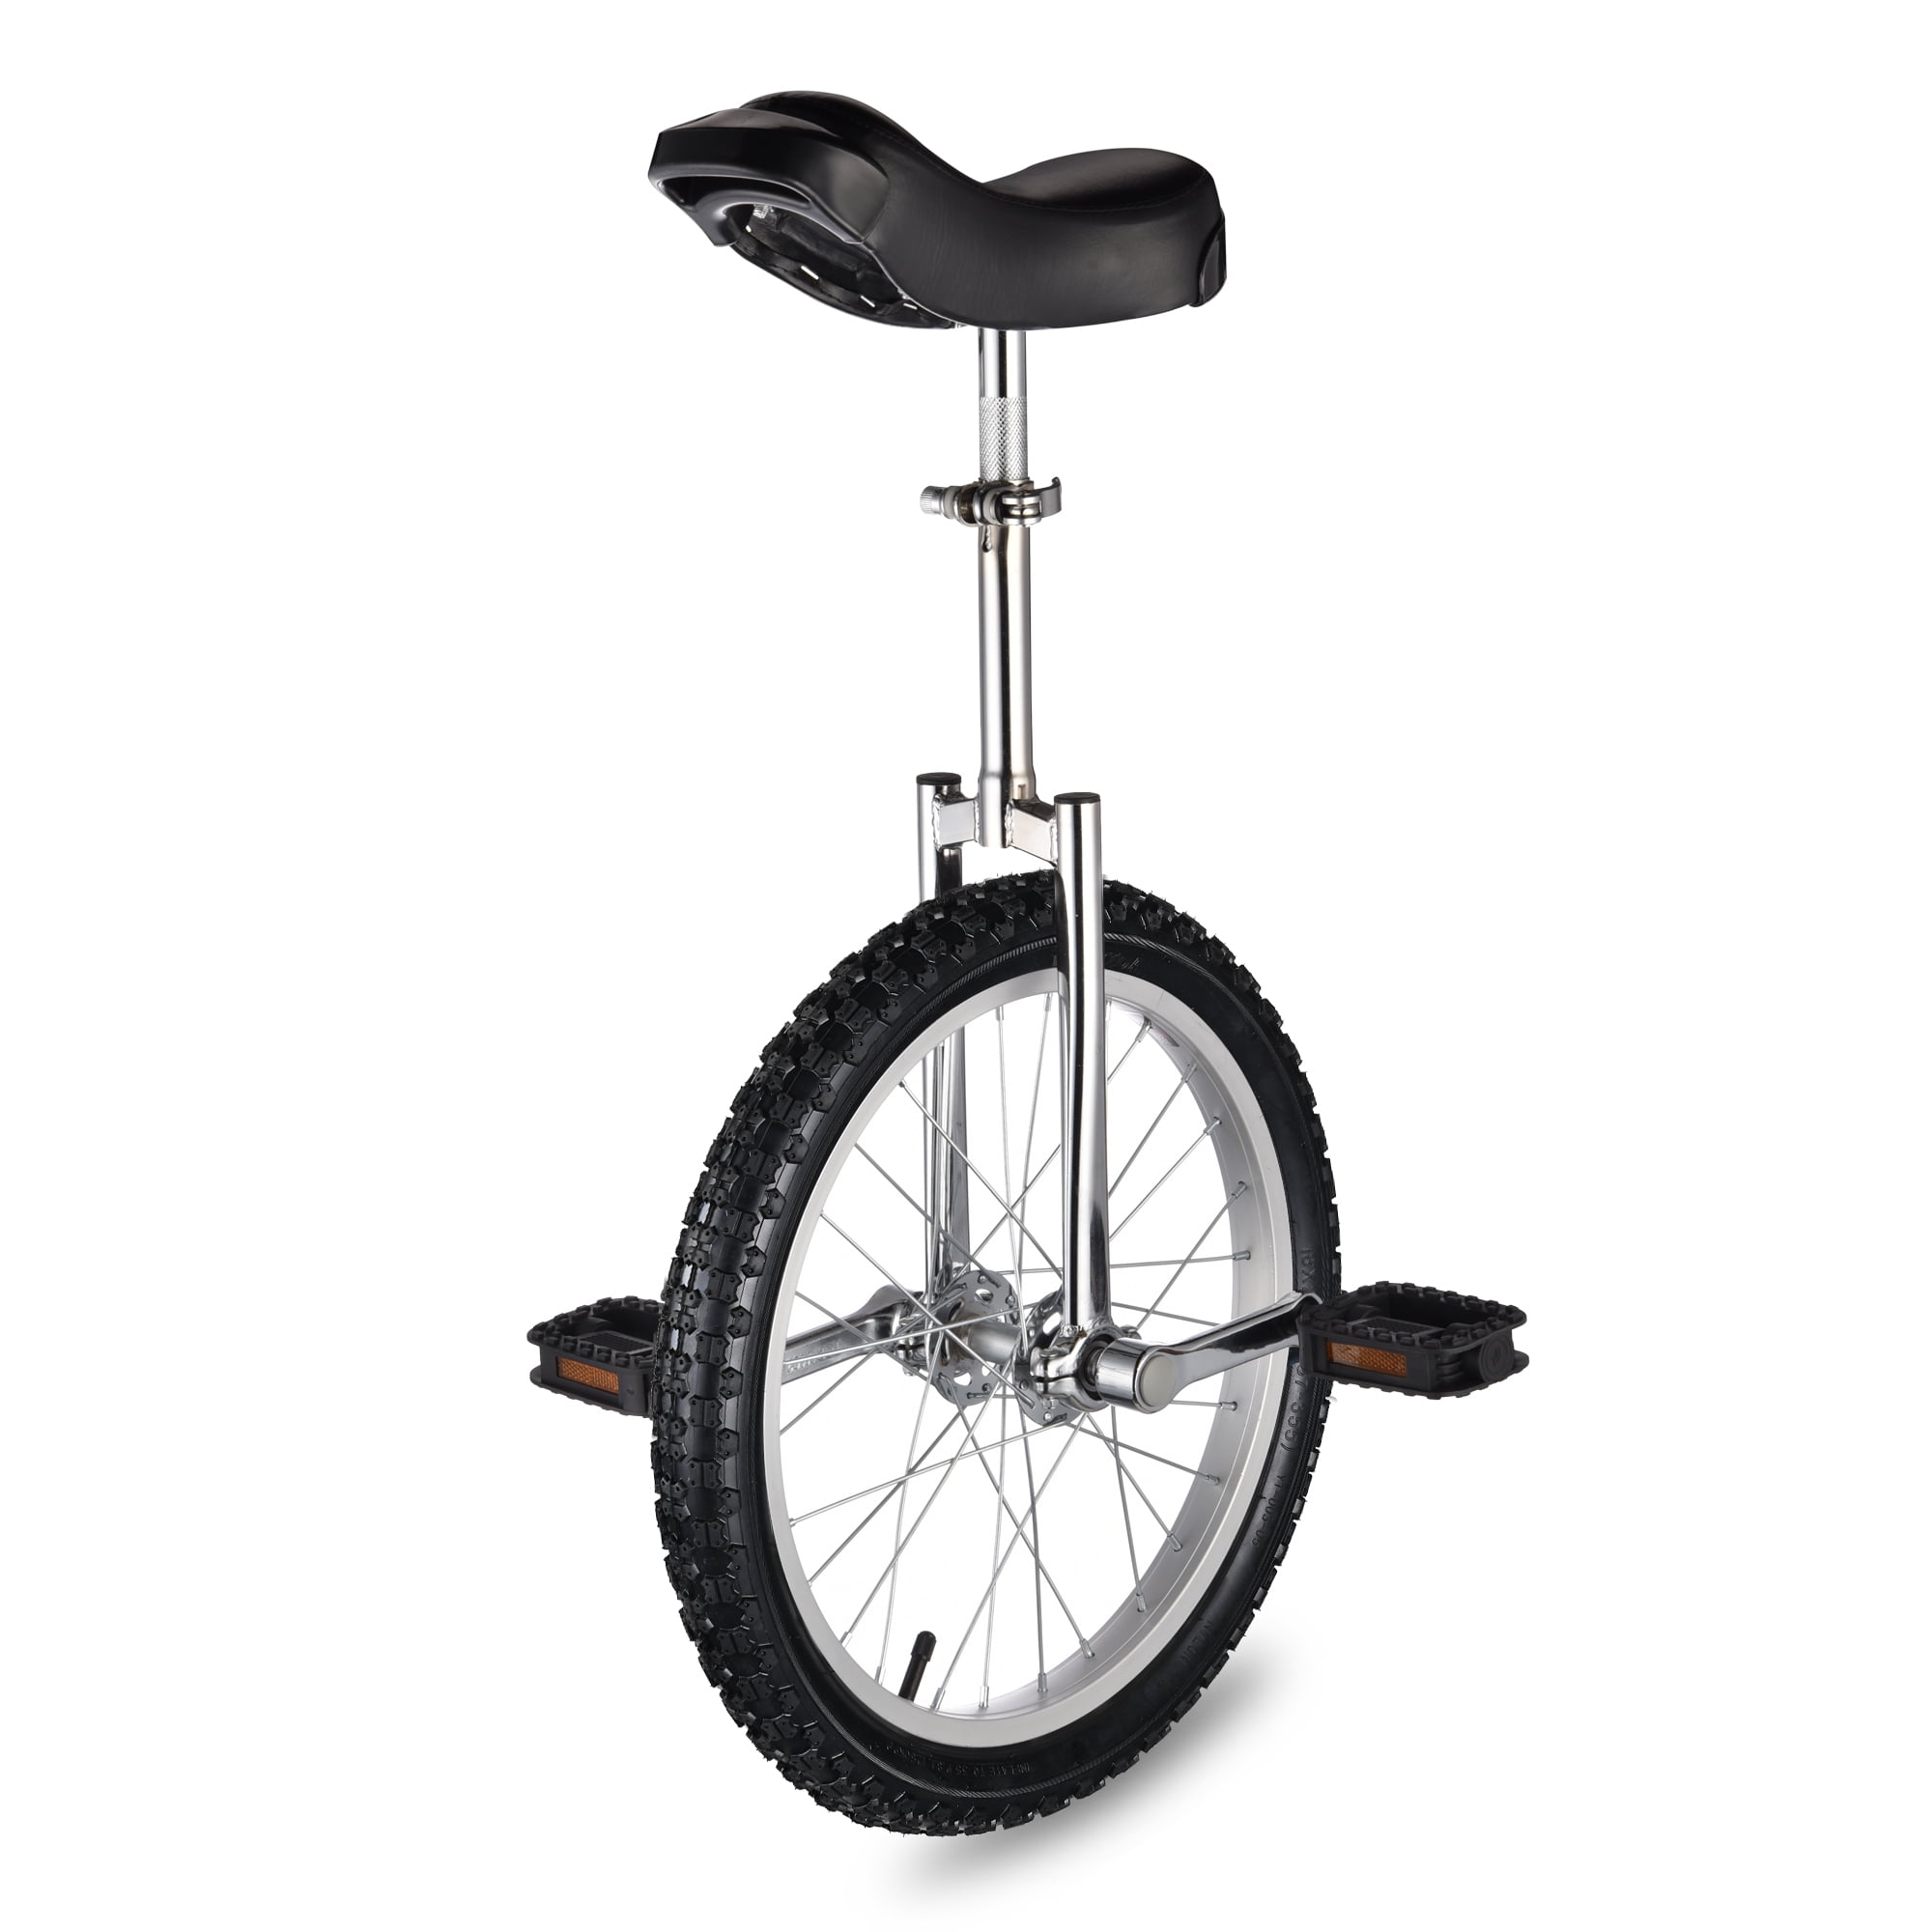 Qu-AX unicycle onlyone 24" Black Alloy Wheel Tyre Black Bicycle 